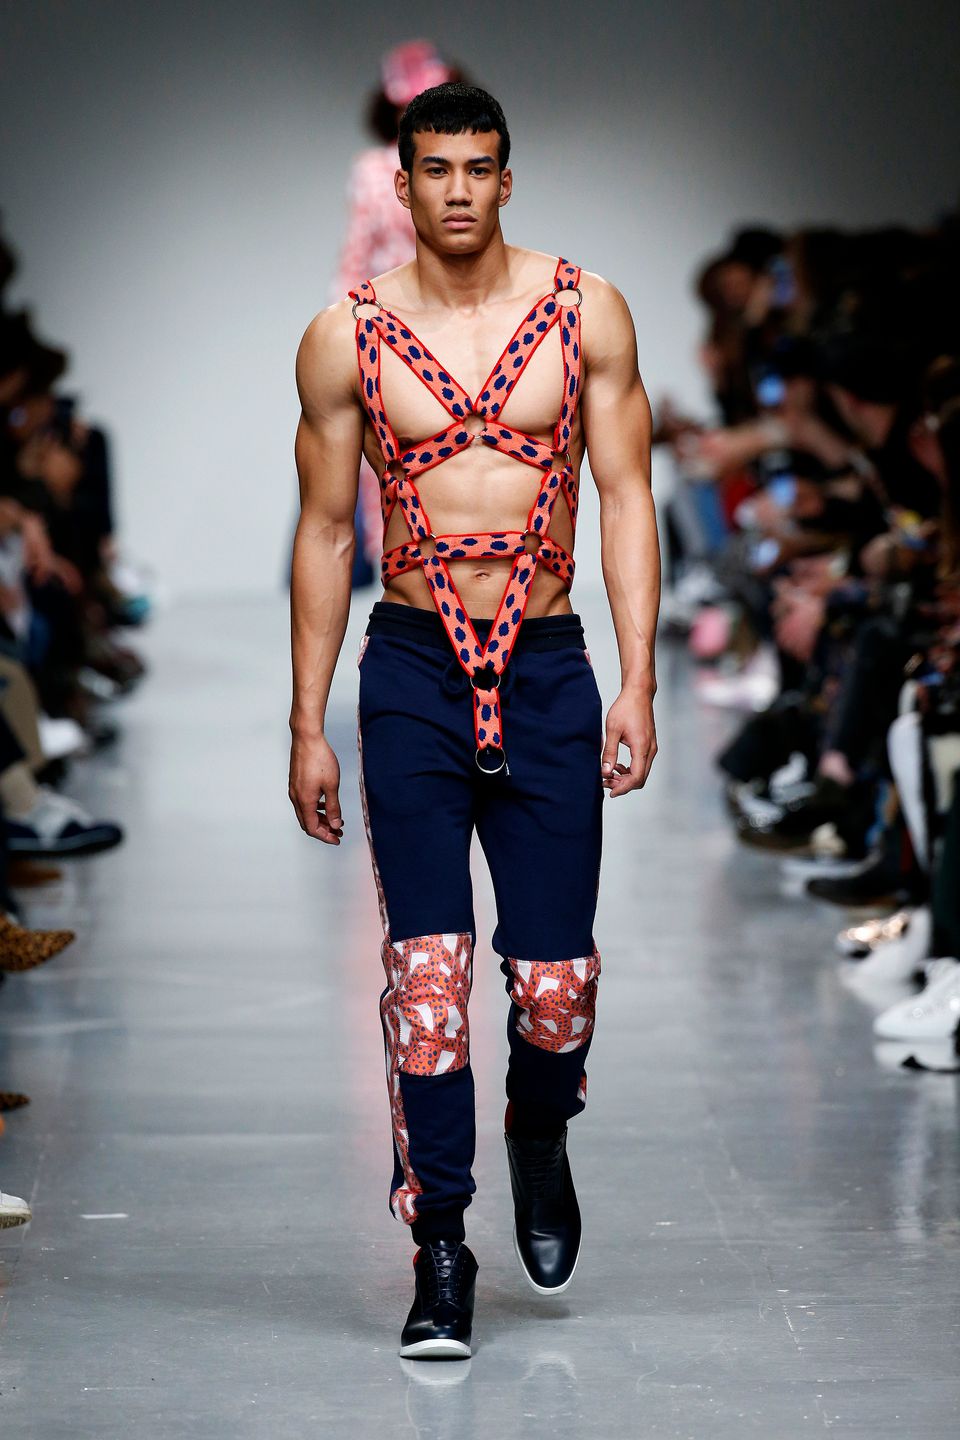 Men's Designers Who Could be Models